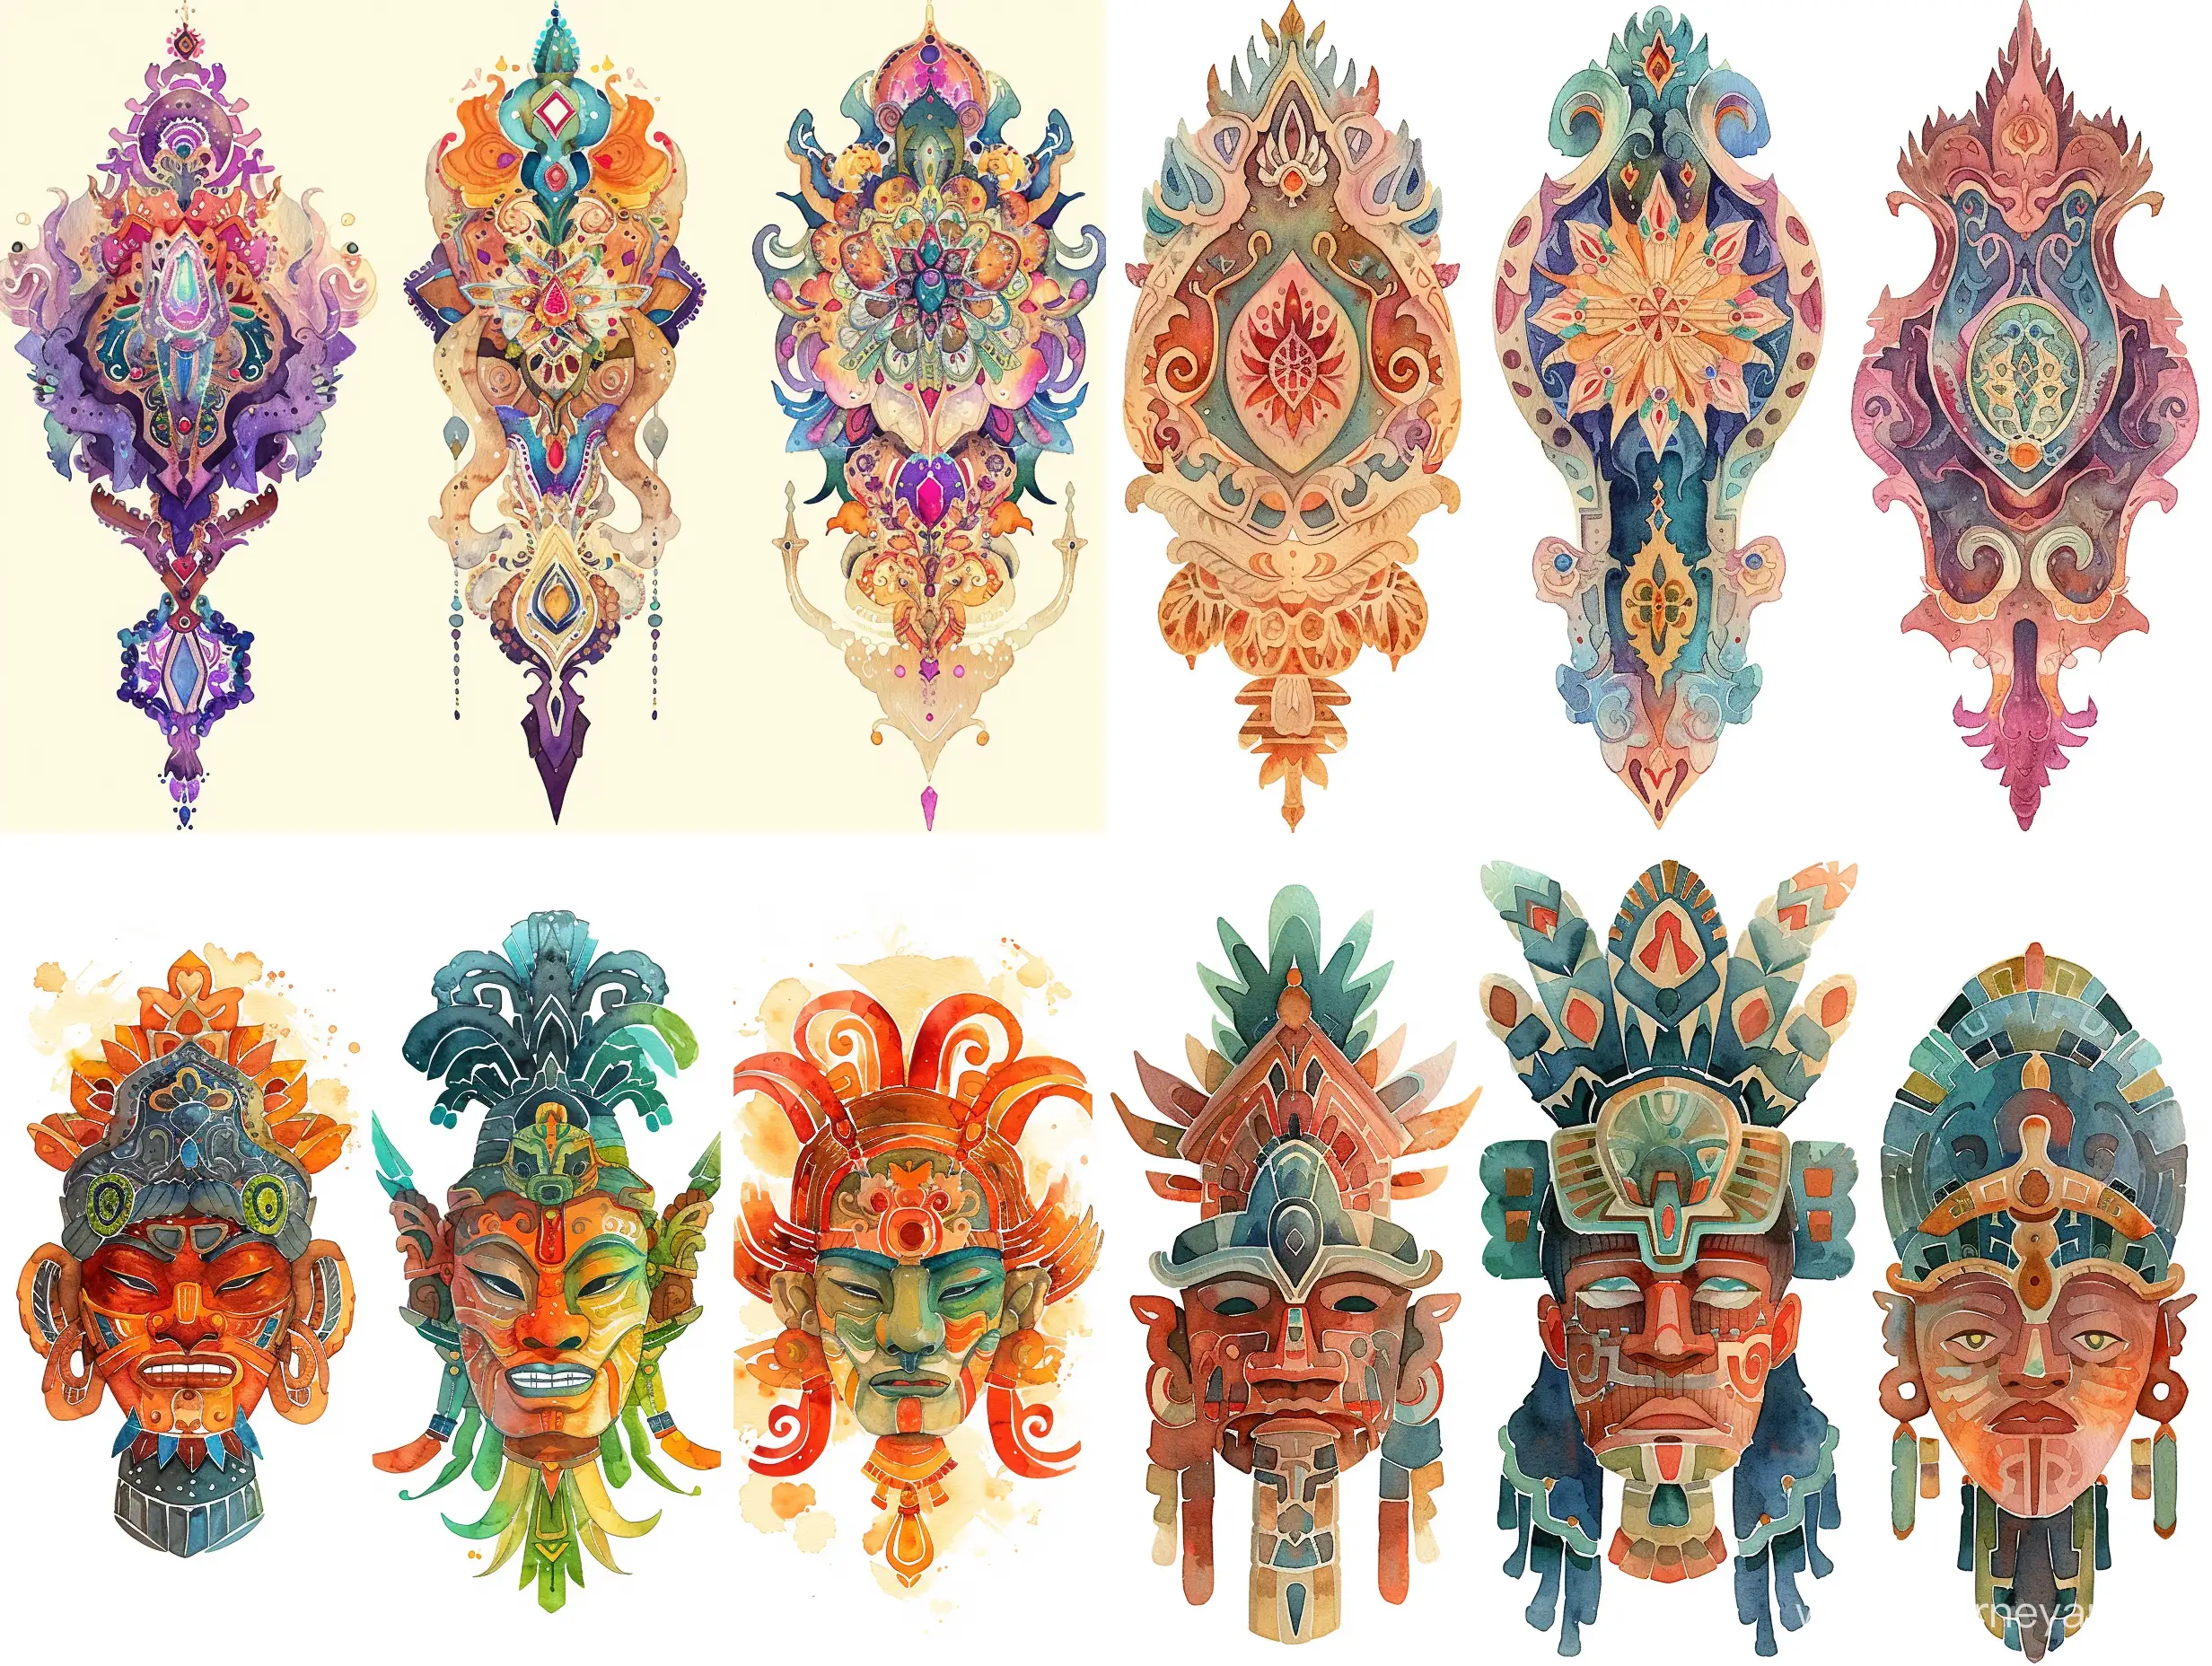 Stylized-Watercolor-Ornaments-from-Ancient-Civilizations-by-Victor-Ngai